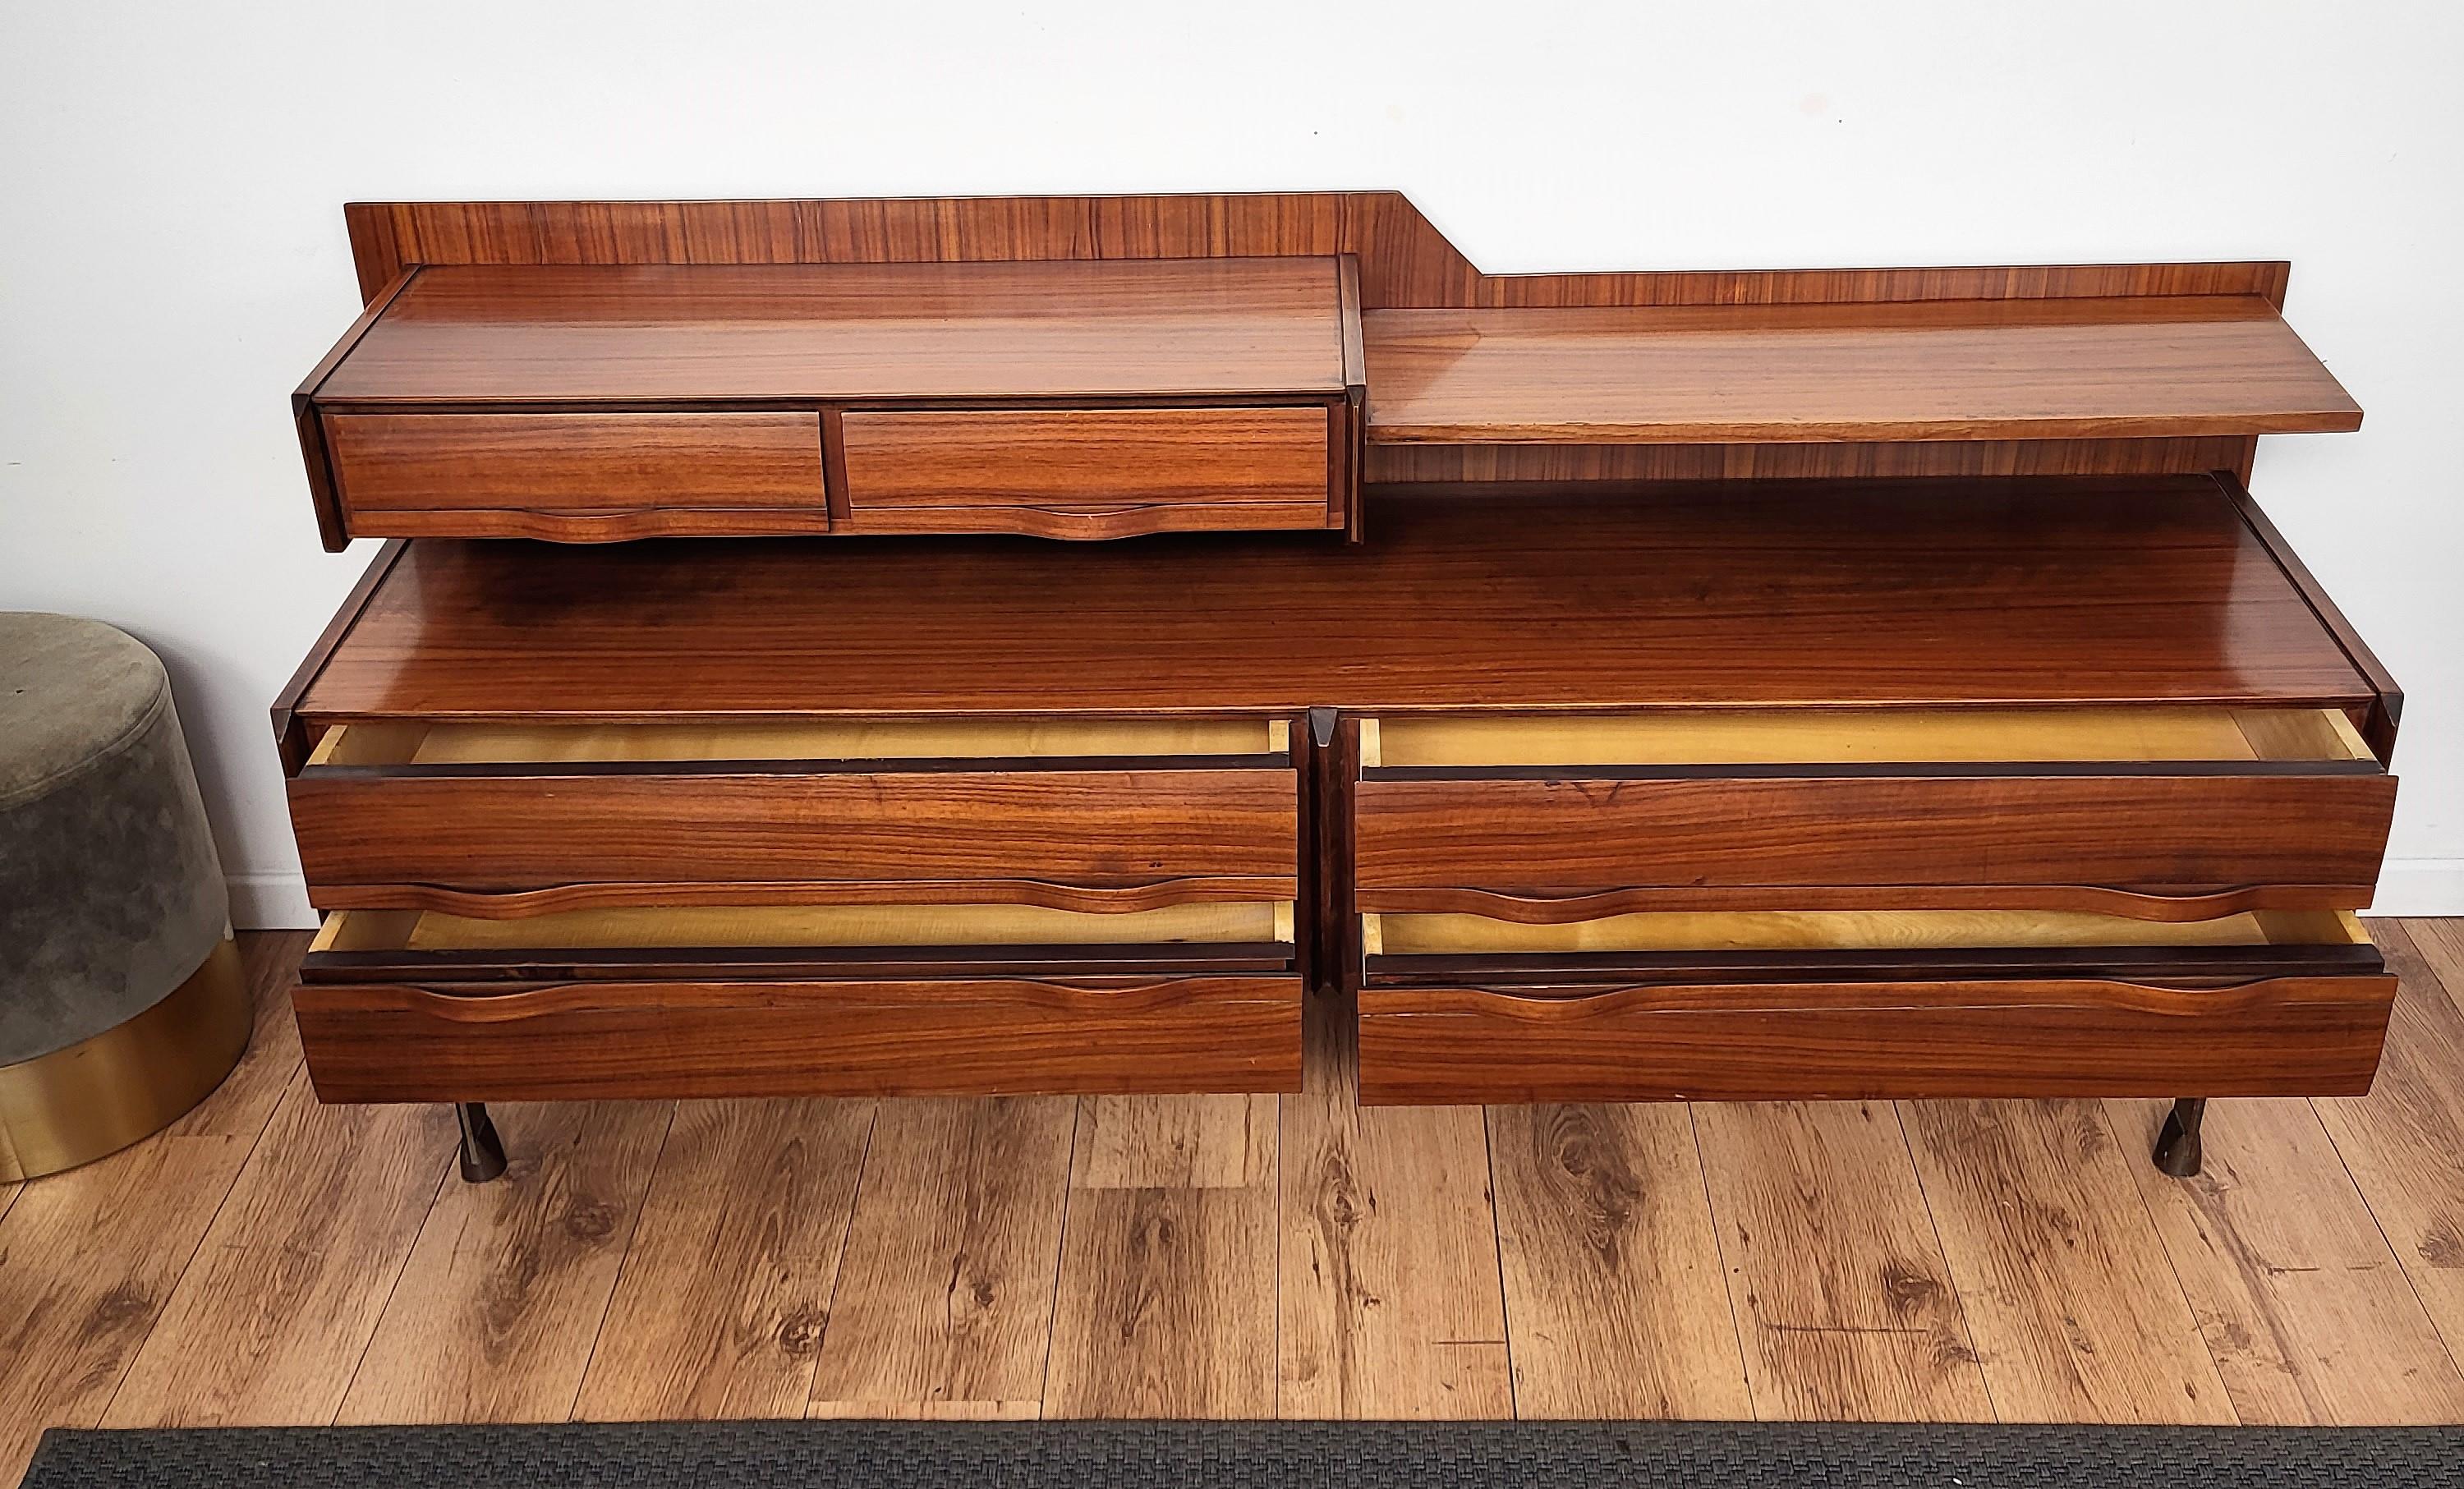 Important and elegantly shaped Italian Art Deco Mid-Century Modern sideboard or credenza designed by Gianfranco Frattini for La Permanente Mobili Cantù, 1960s. With its greatly designed edges, frames and details in beautiful wood, the credenza has